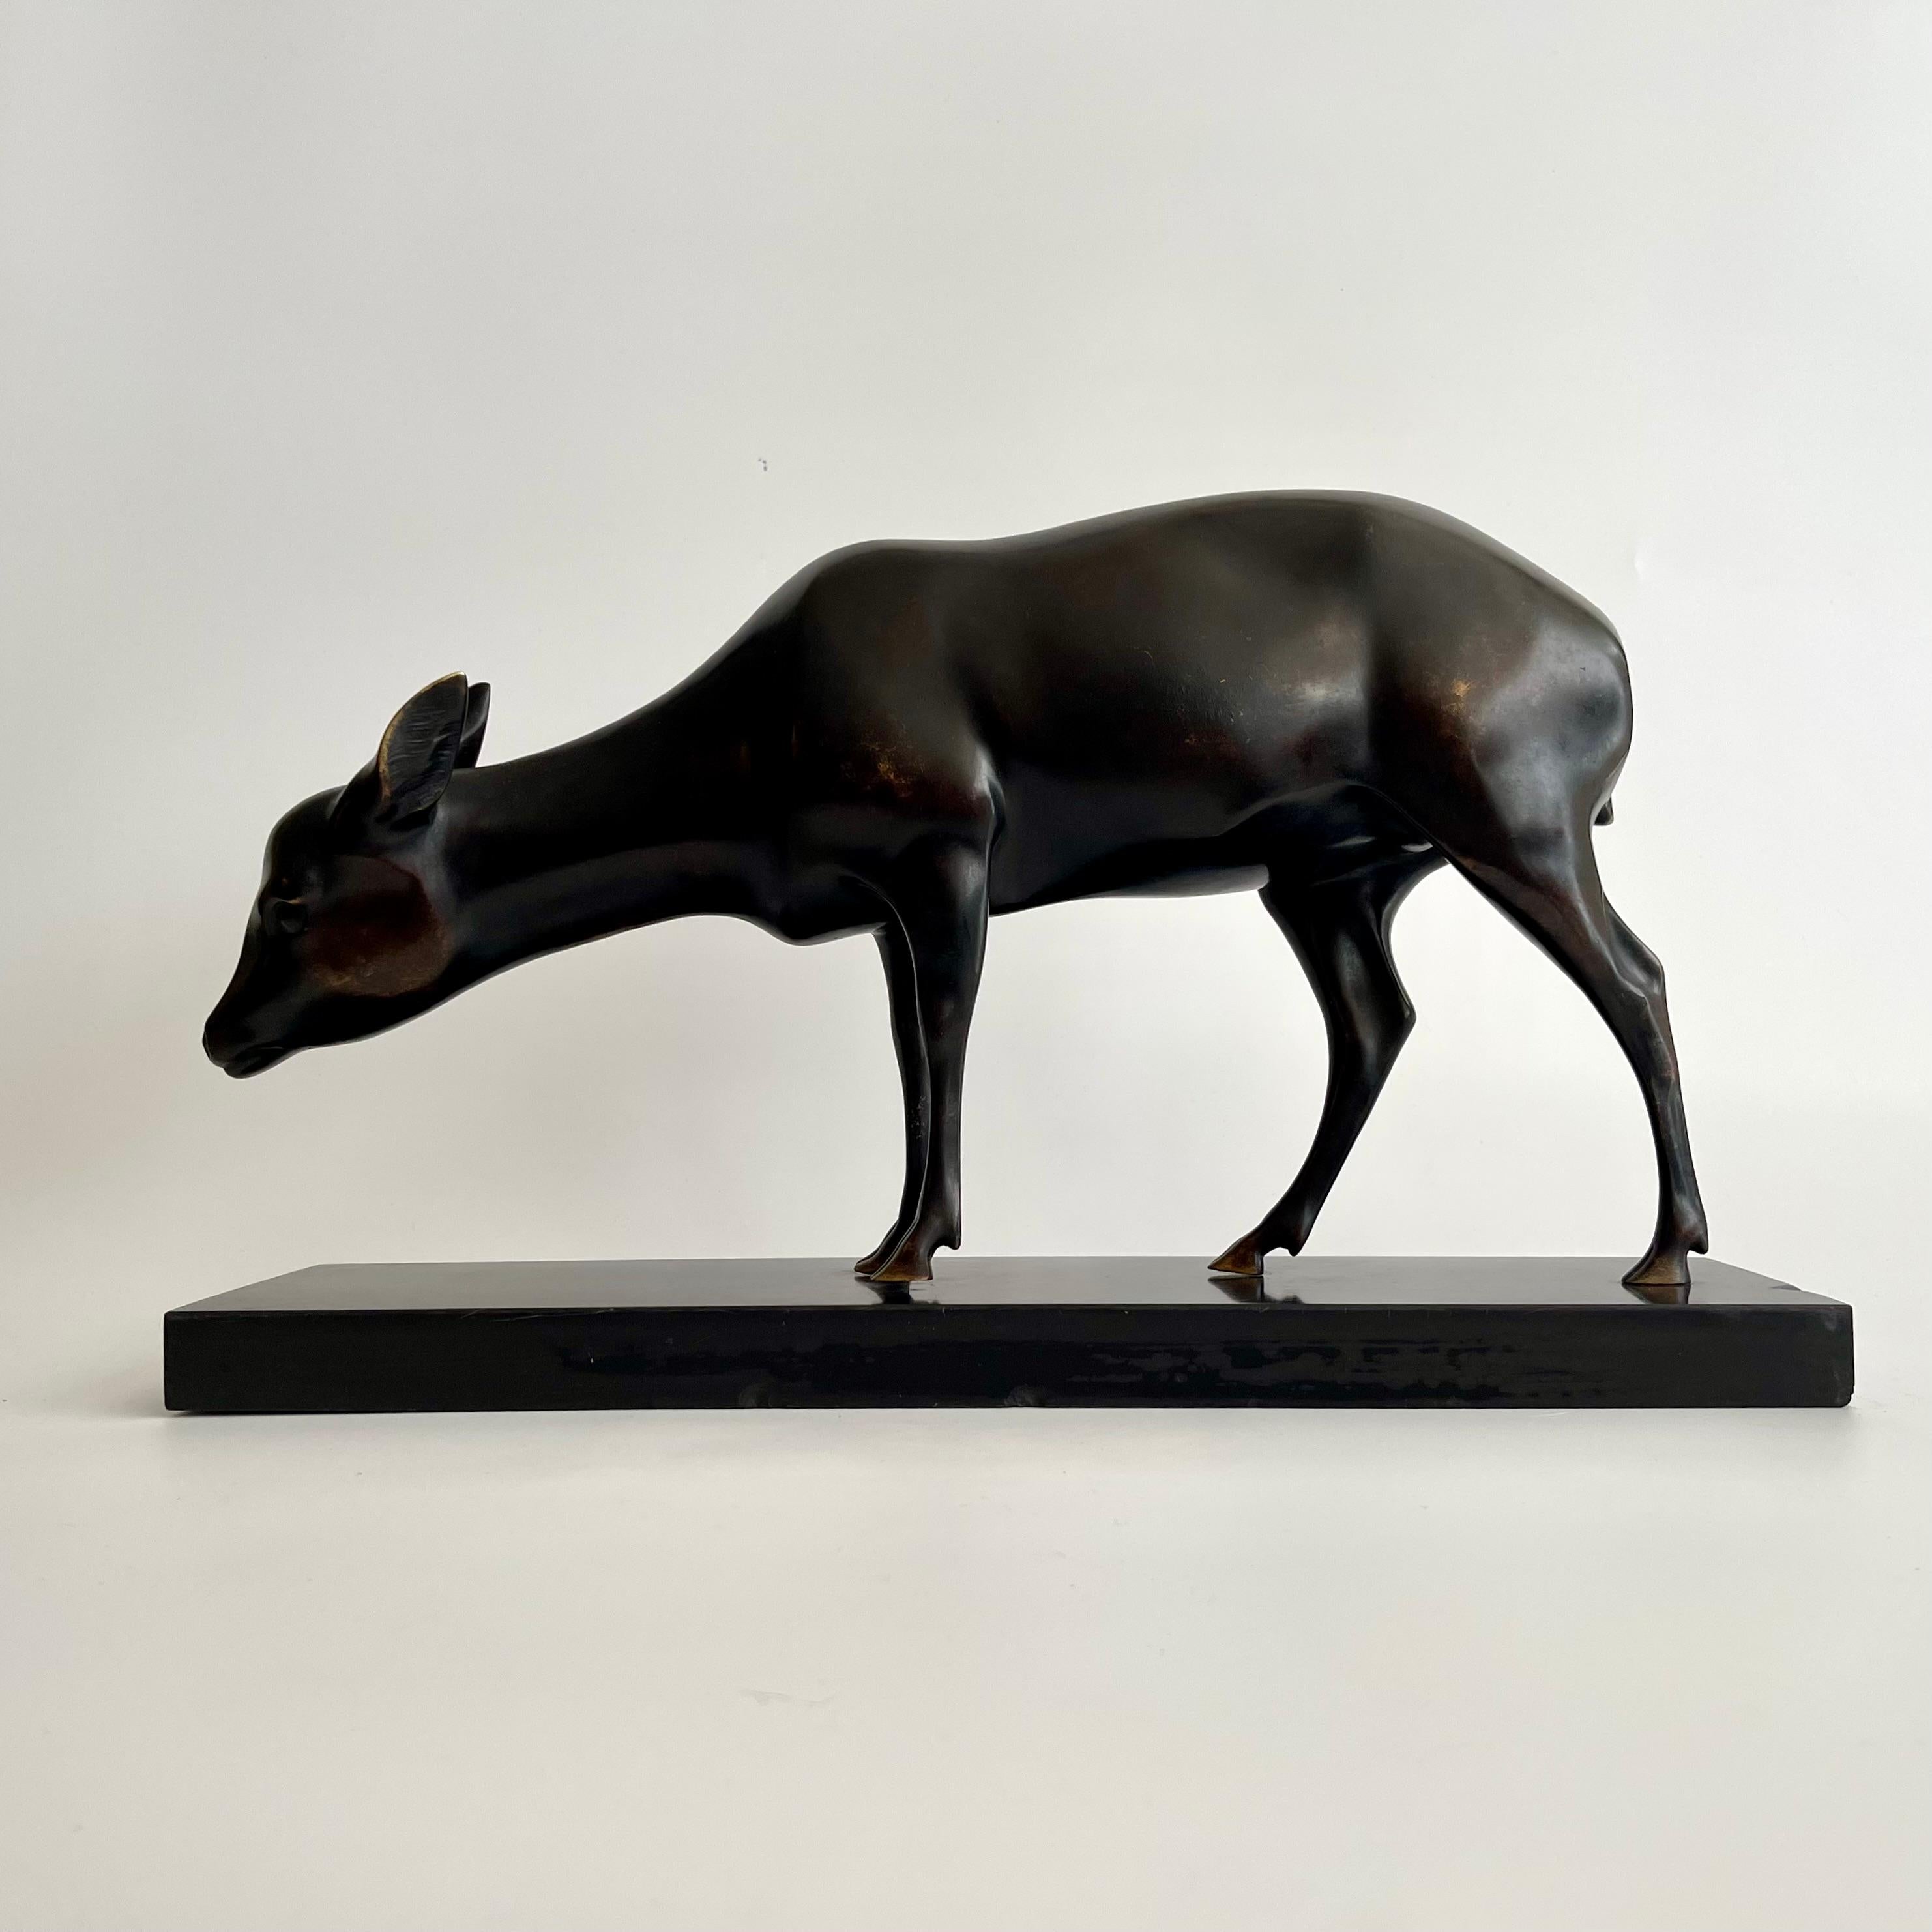 A beautiful bronze sculpture of a grazing of a deer signed by artist Armand Sinko.
Dimensions: Base 50cm width, 13 cm deep
Sculpture: 47cm width, 26cm height, 9cm depth